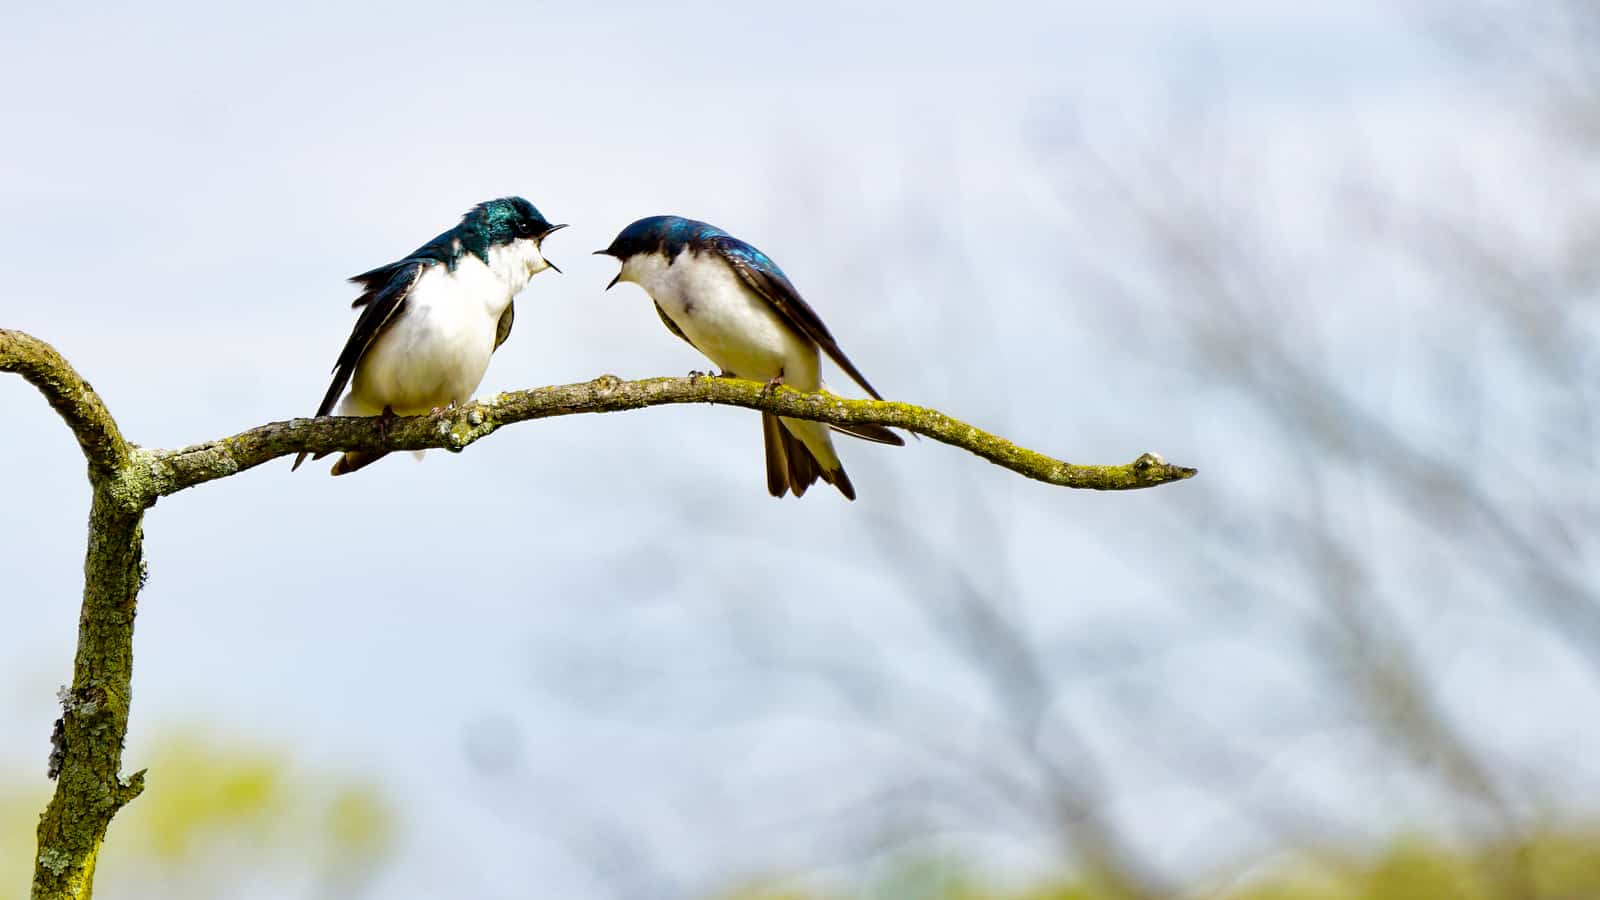 Alt text: two white and blue birds sit close together on a branch, facing each other with their mouths open as if arguing.